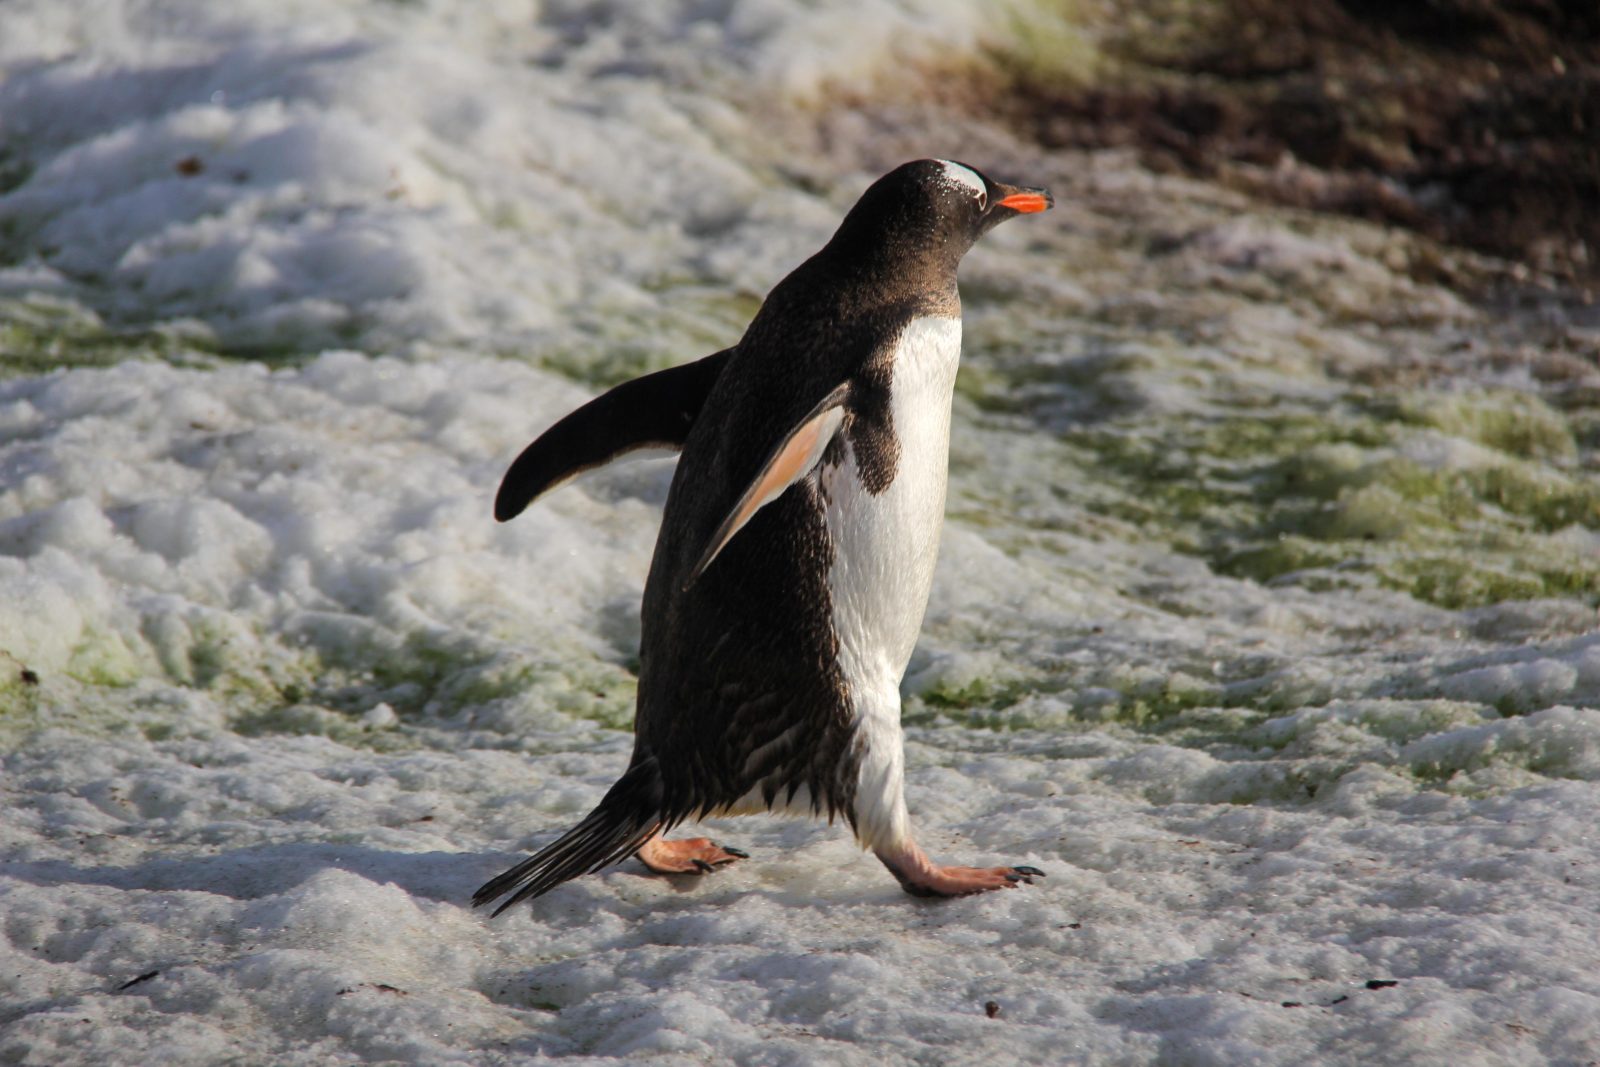 A penguin moves along snowy ground.